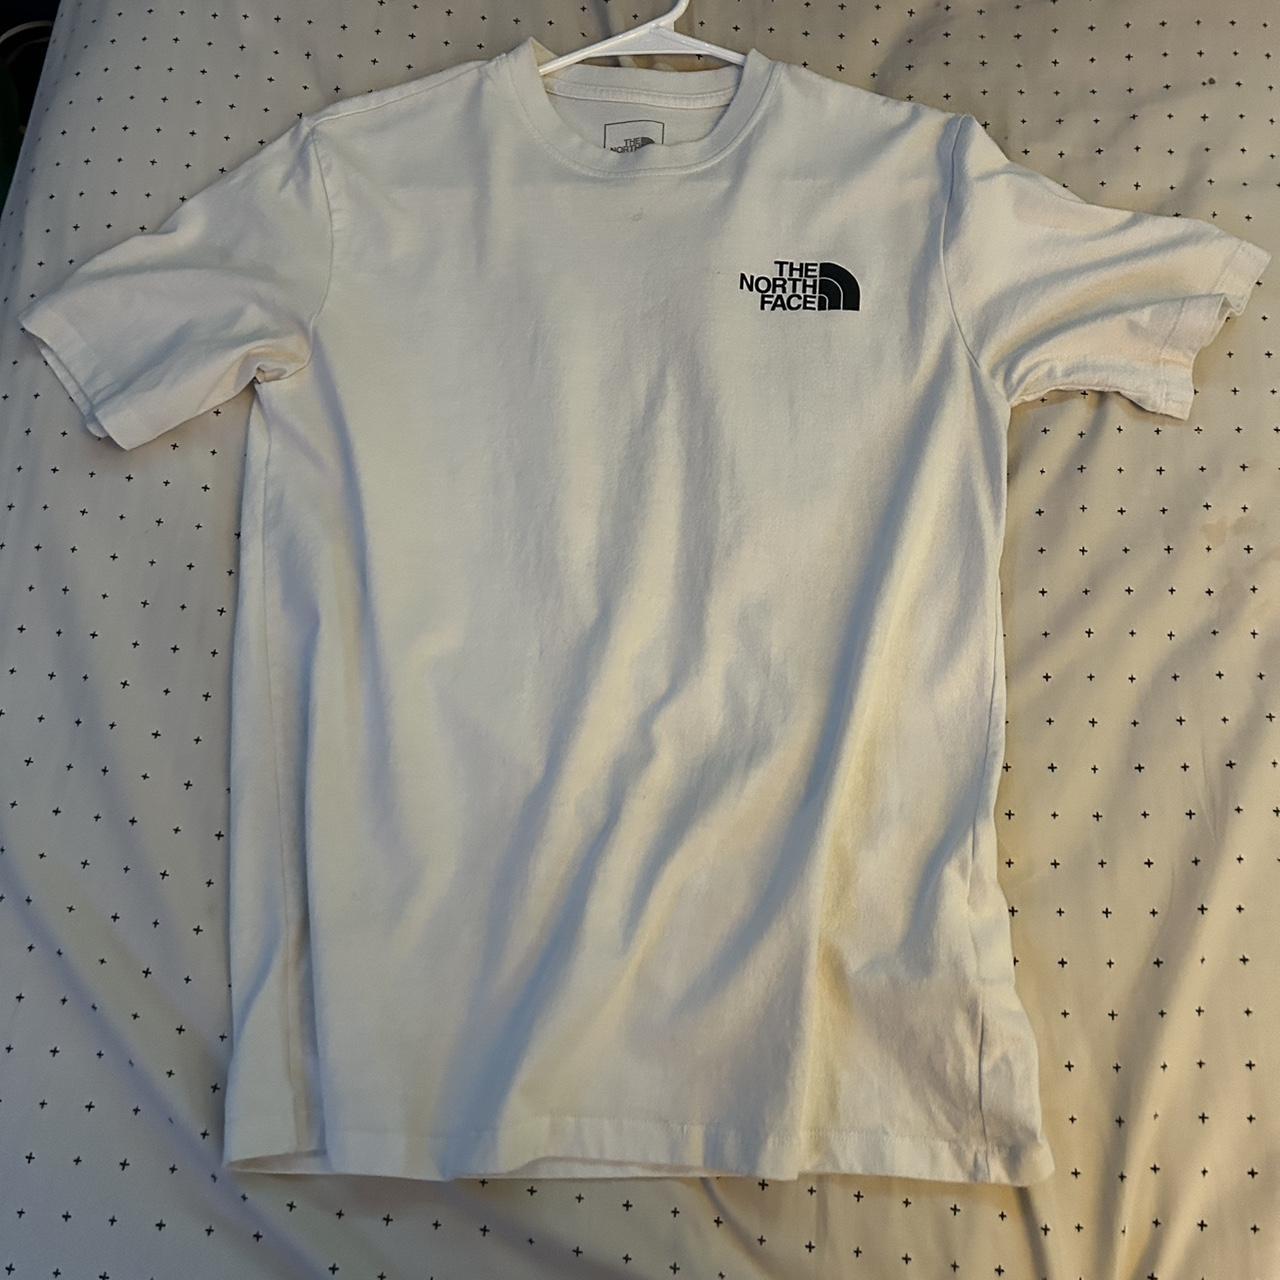 The North Face Men's Shirt The North Face Men's - Depop